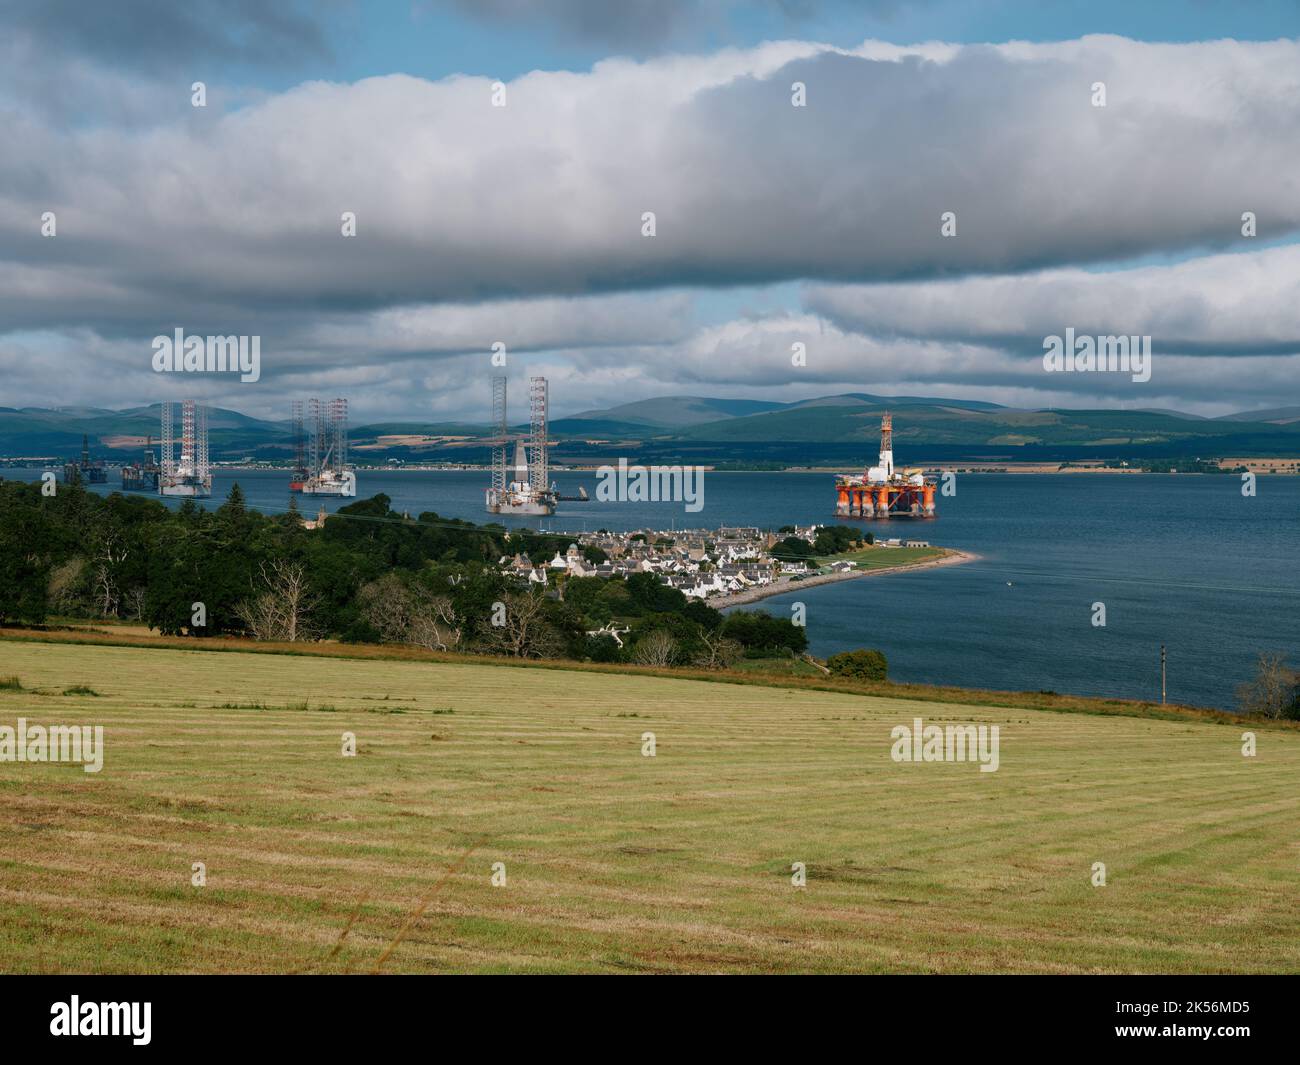 The summer farming landscape and coastline of the Cromatry Firth with layed up oil rigs, Cromarty, Black Isle, Ross and Cromarty, Highland Scotland UK Stock Photo